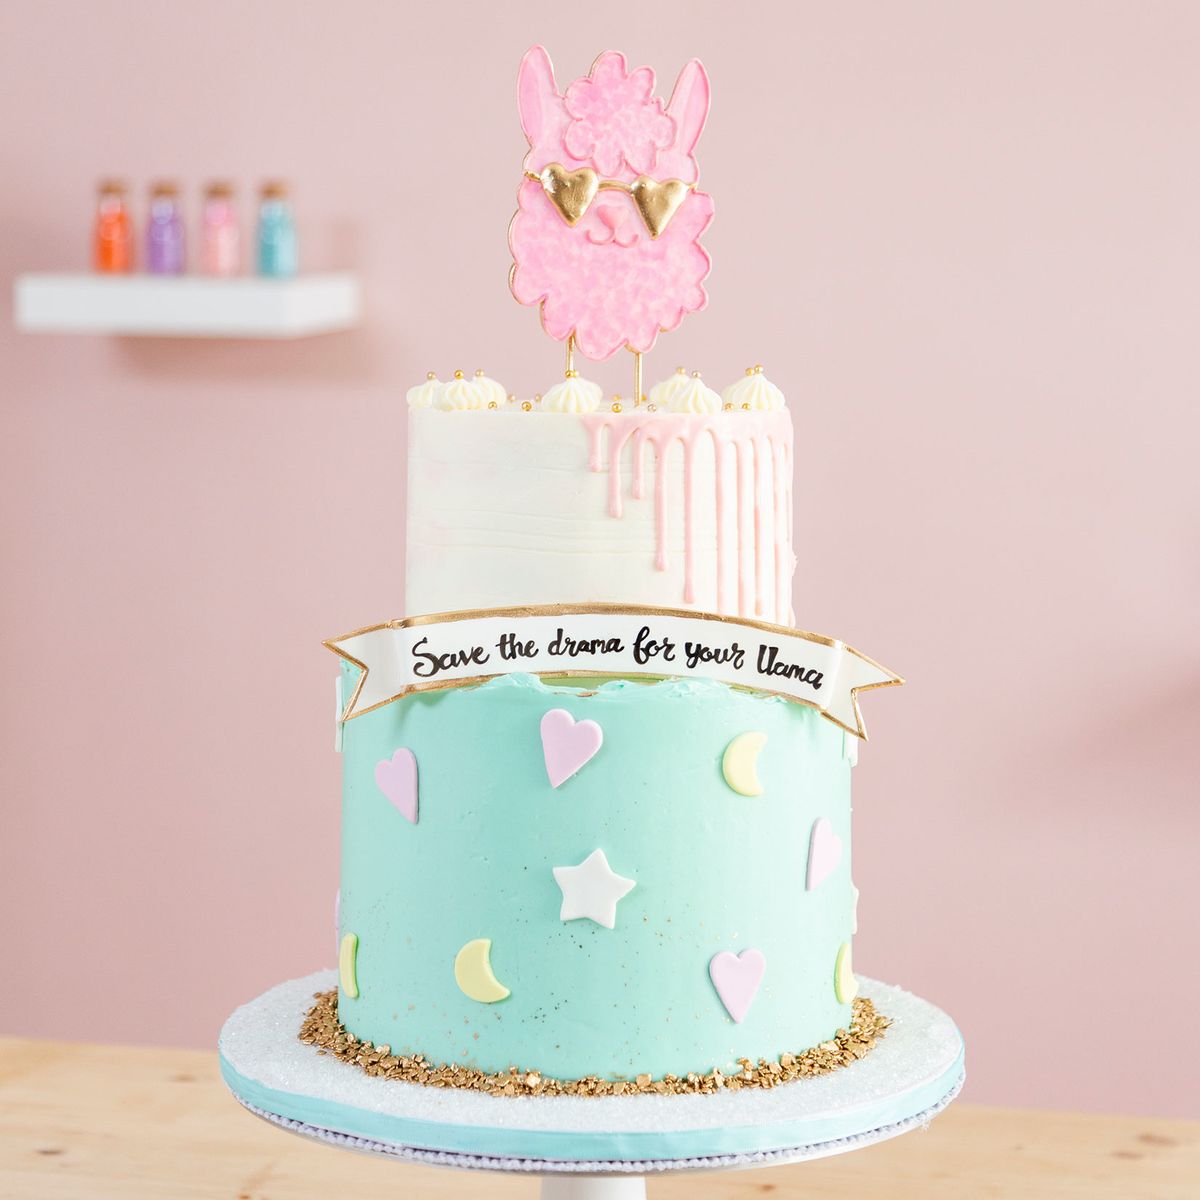 Going Stir Crazy? Take Our Cake Decorating Class for Free!